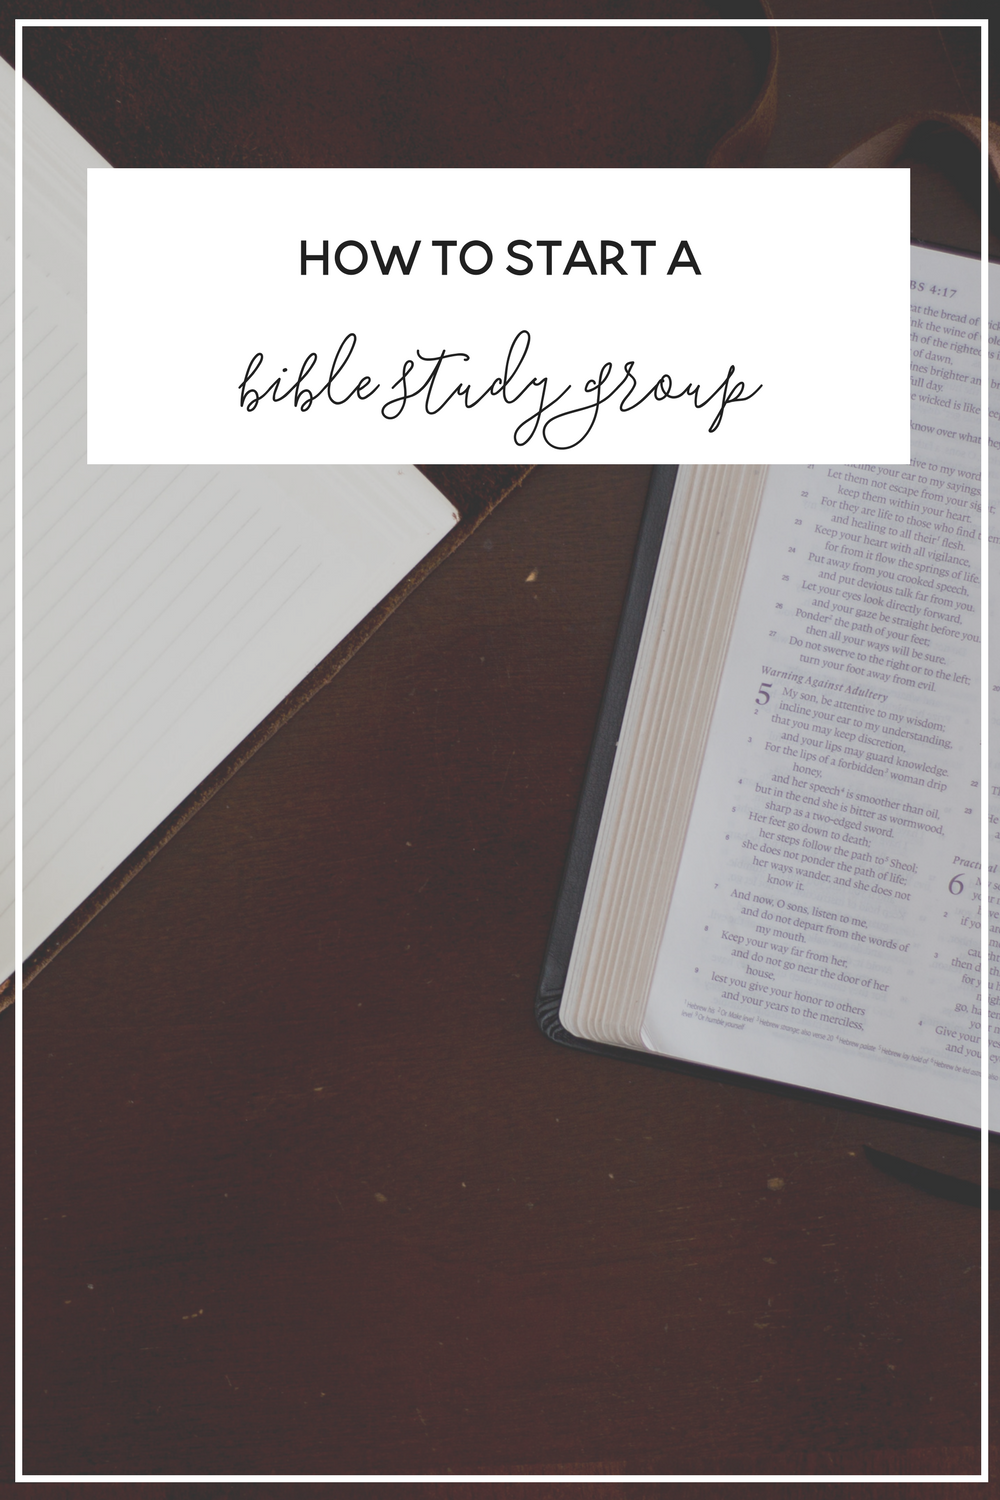 How to Start a Bible Study Group